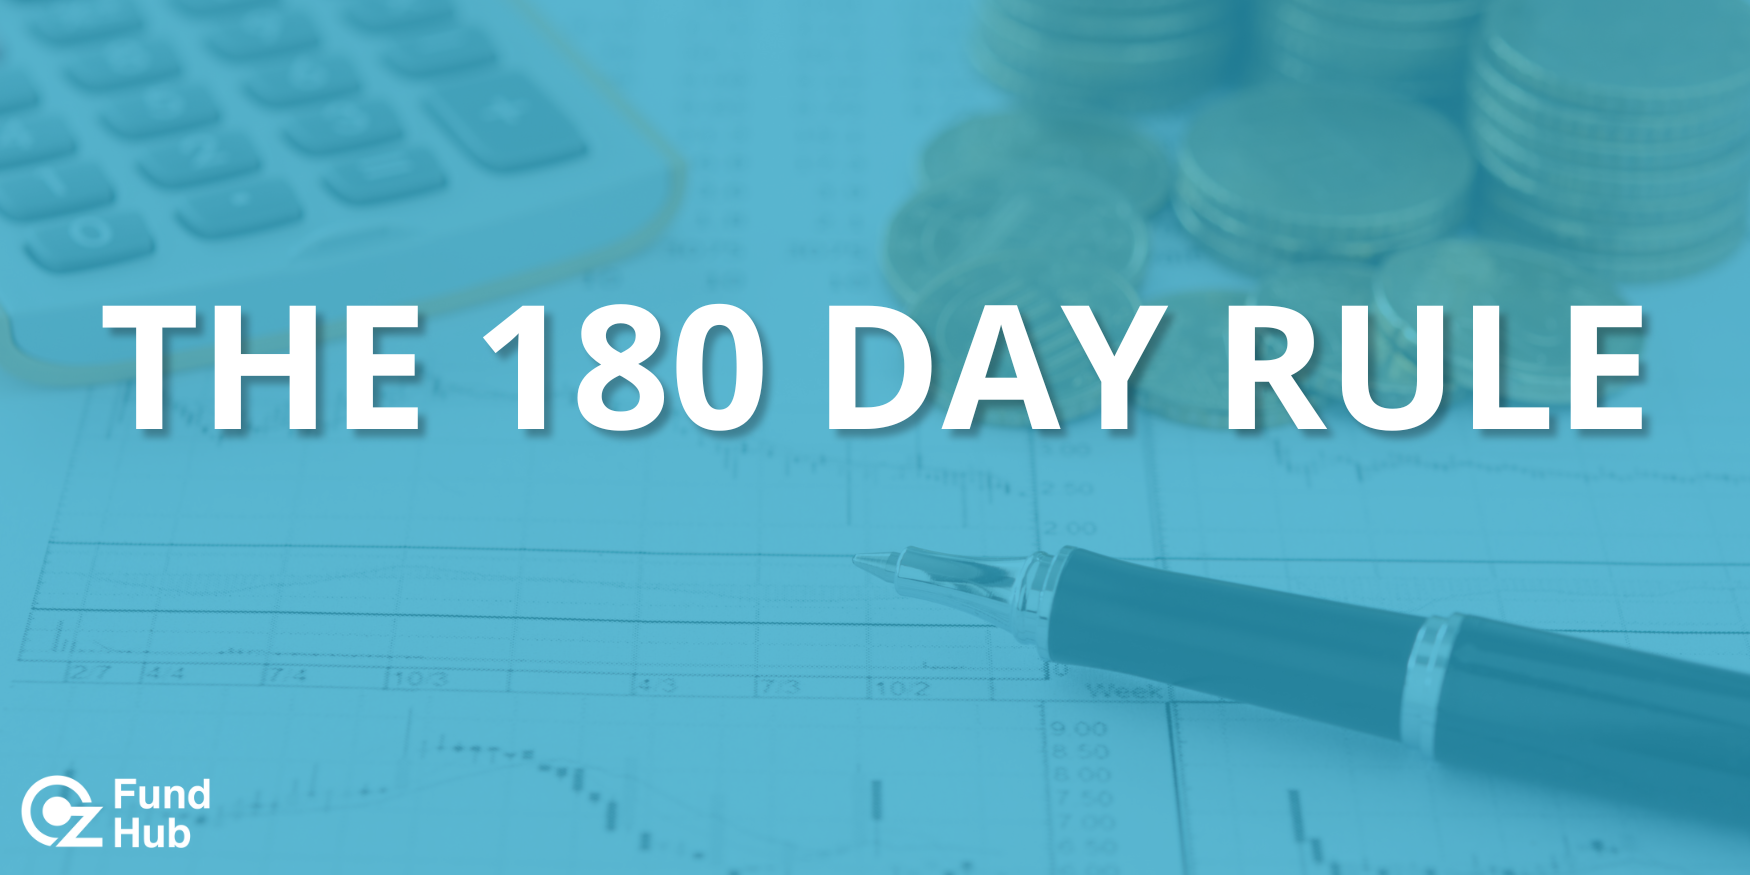 The 180 Day Rule